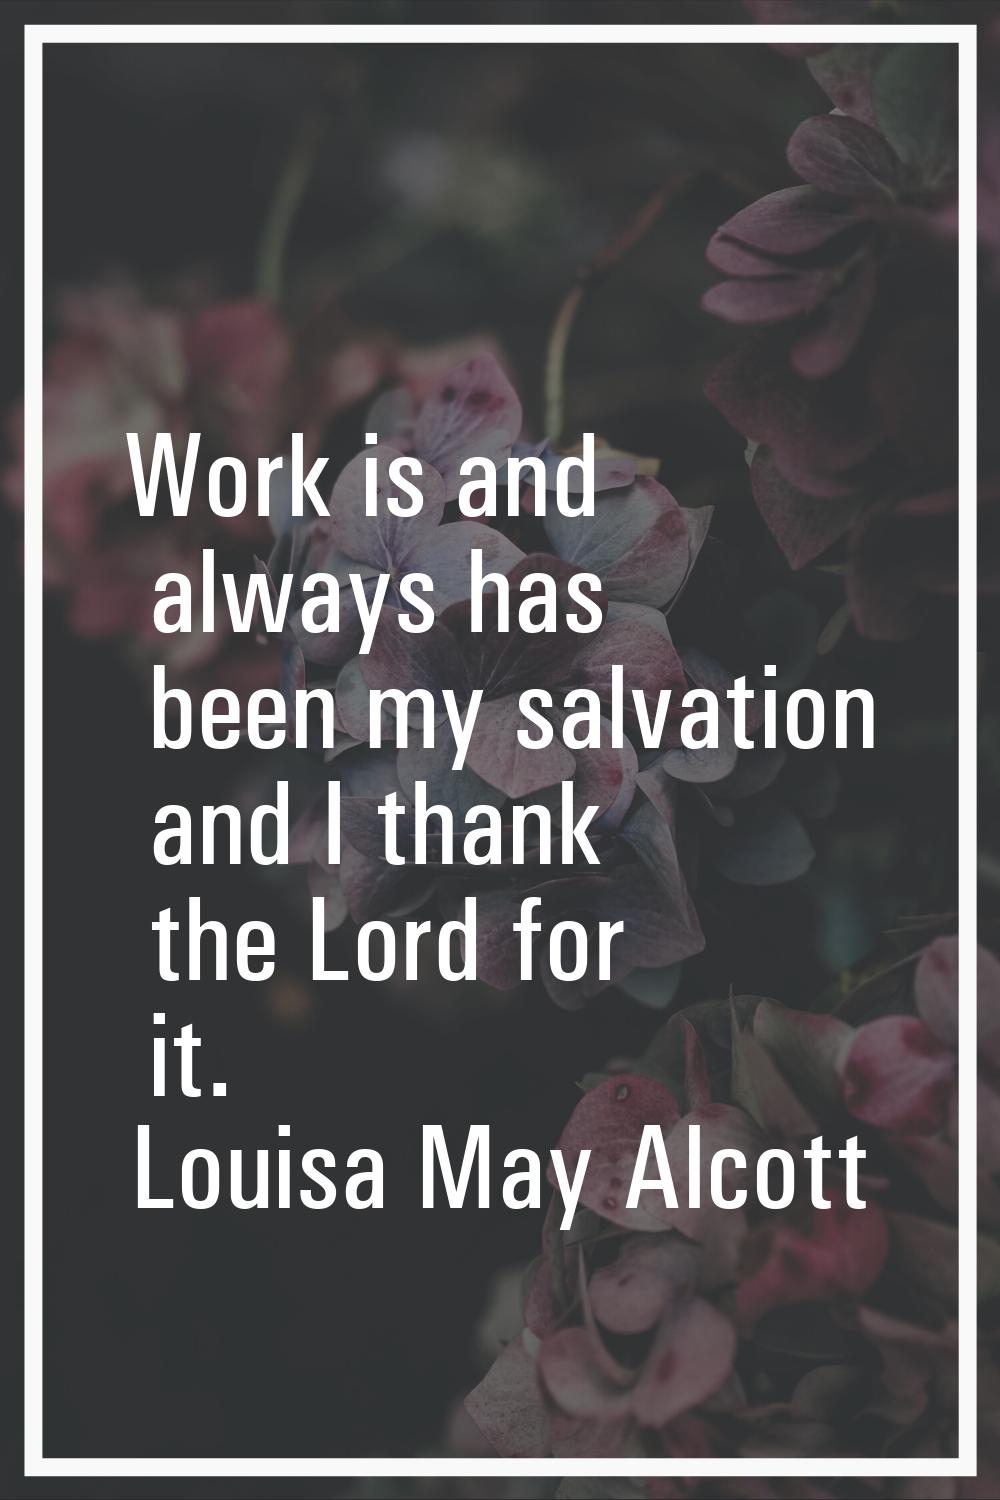 Work is and always has been my salvation and I thank the Lord for it.